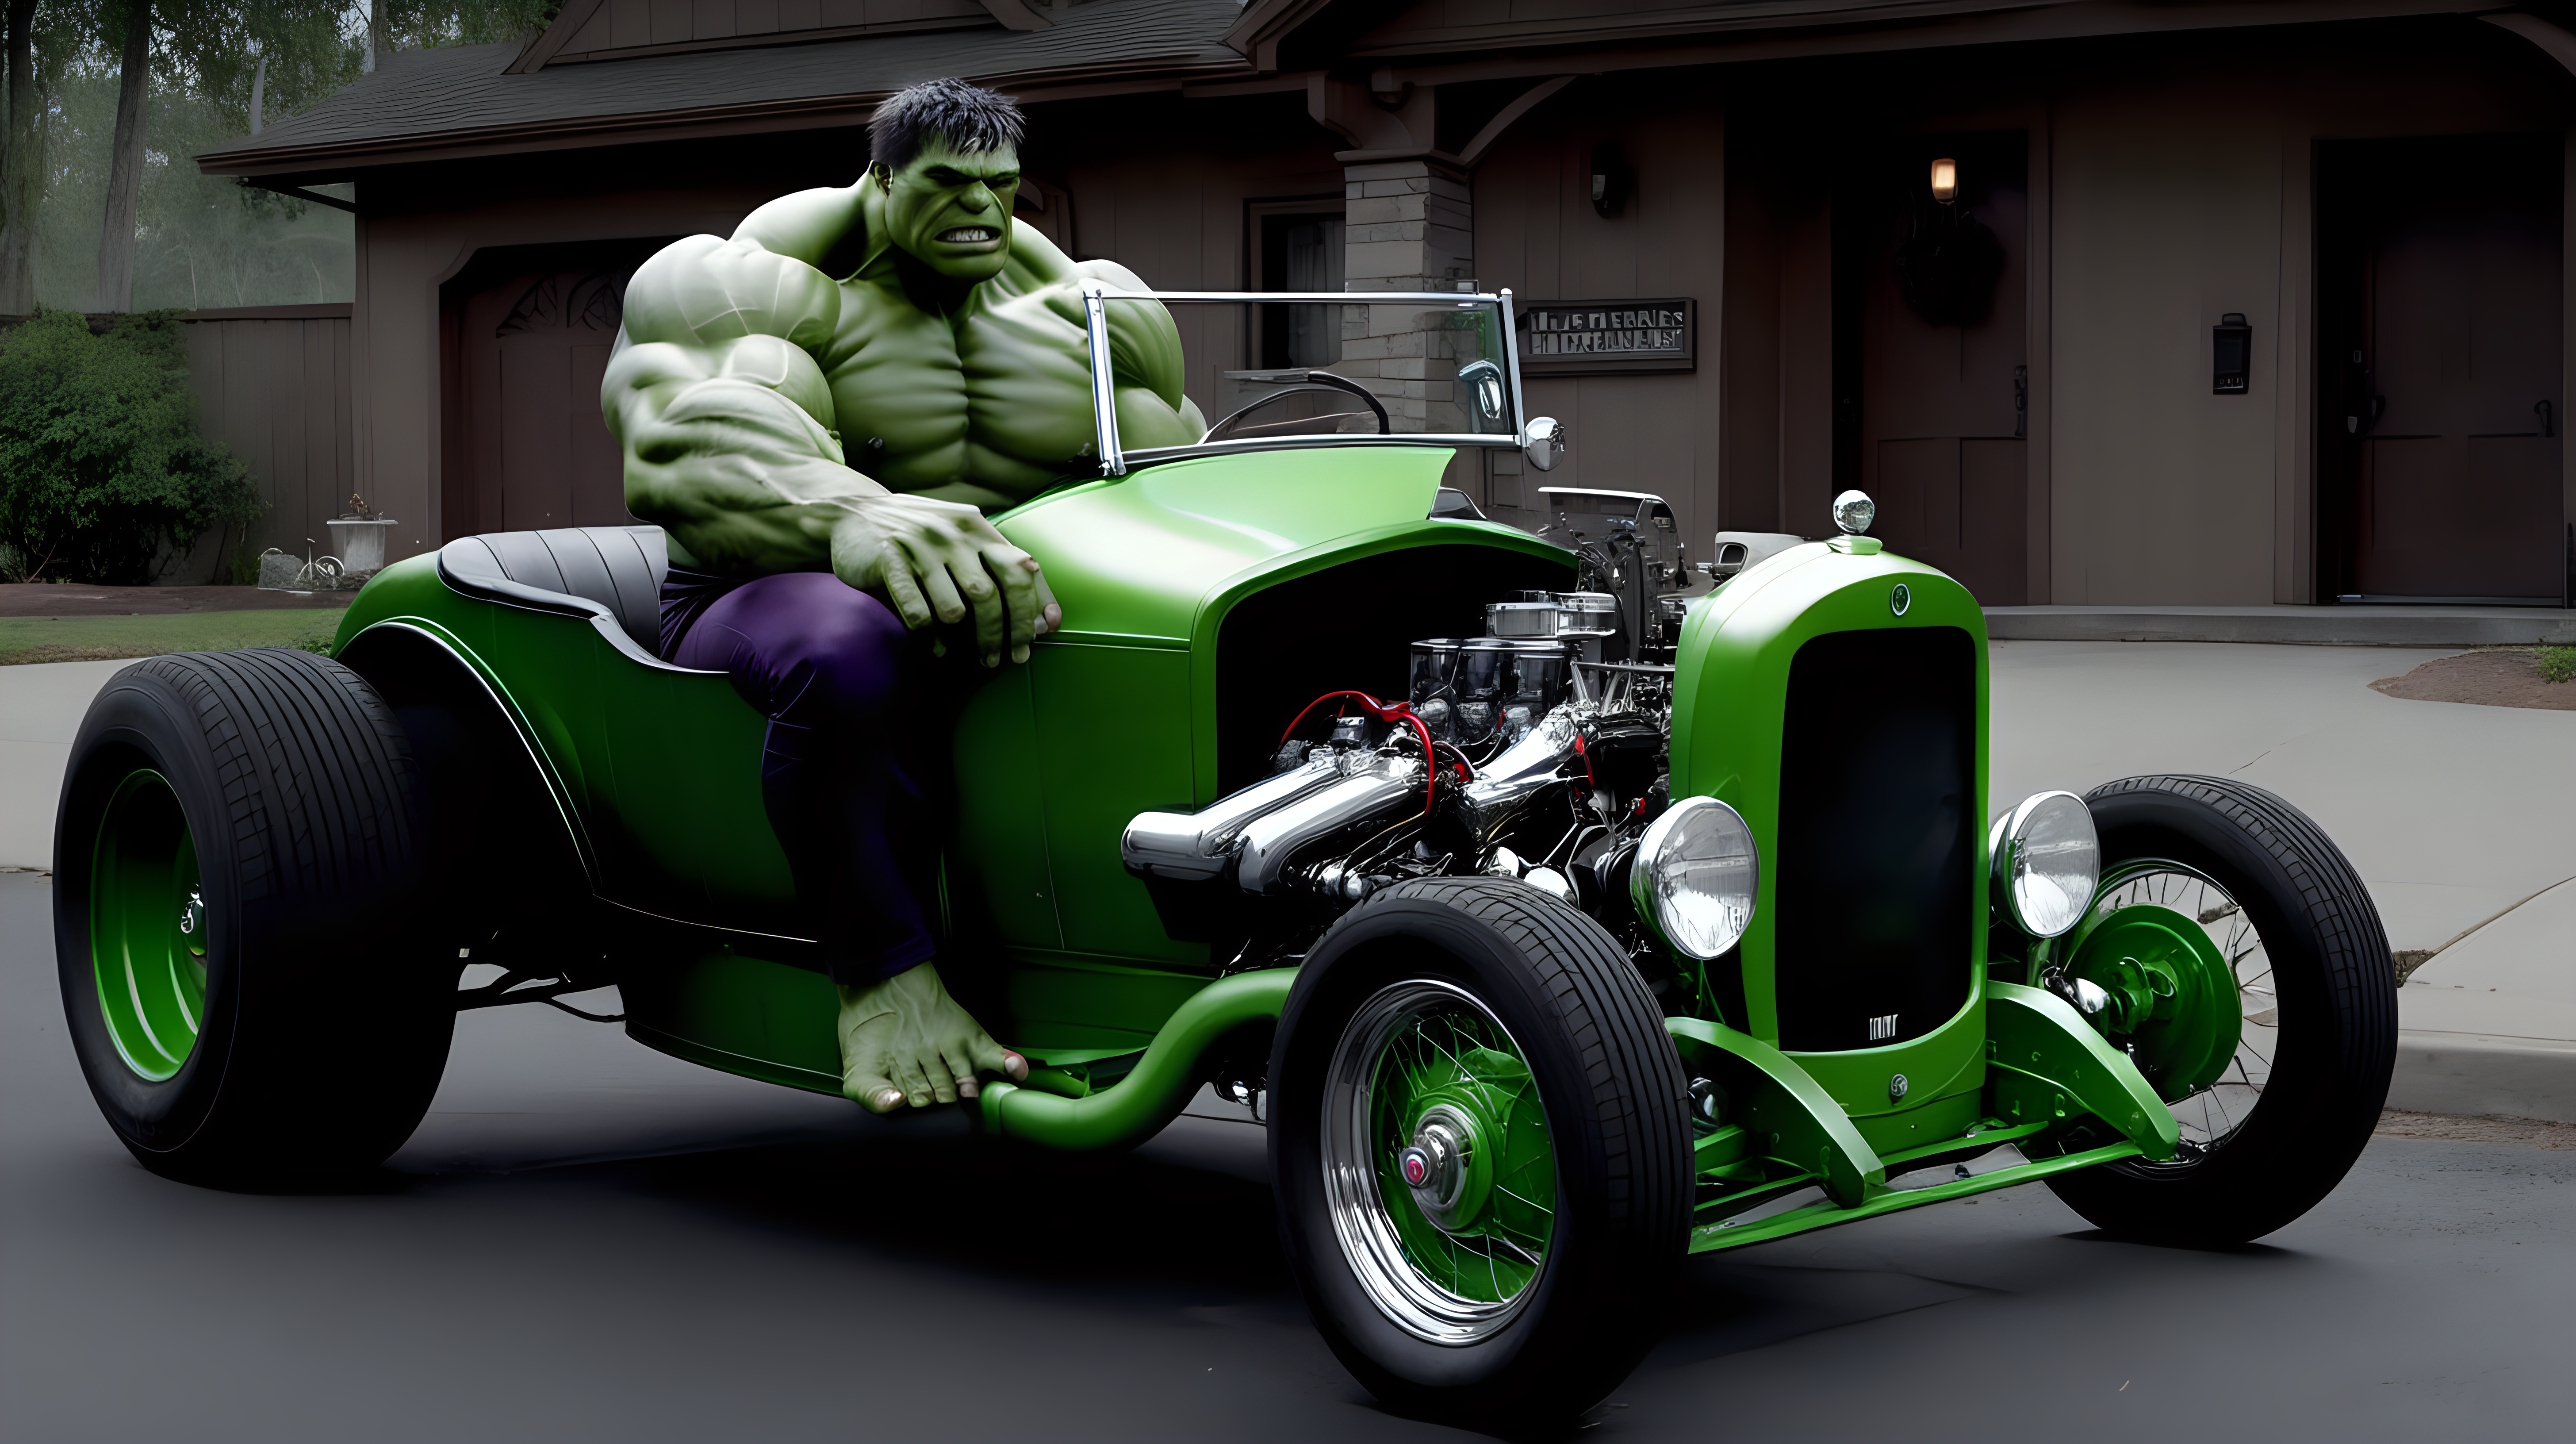 The Hulk sitting on a 1920's roadster